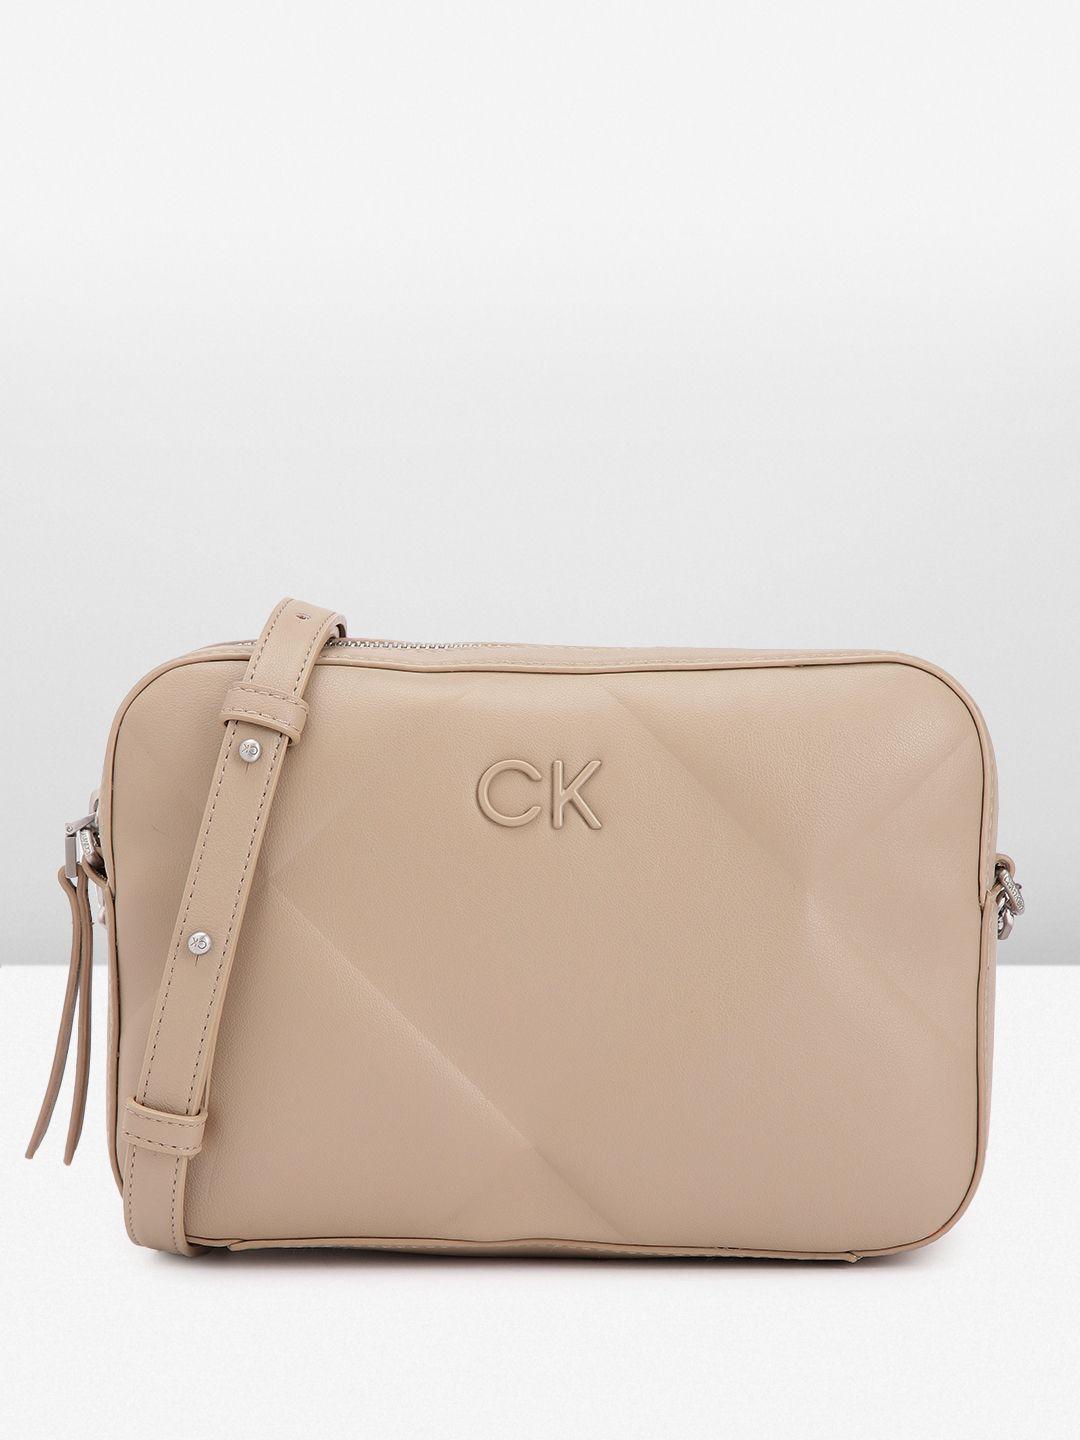 calvin klein geometric design structured sling bag with quilted detail